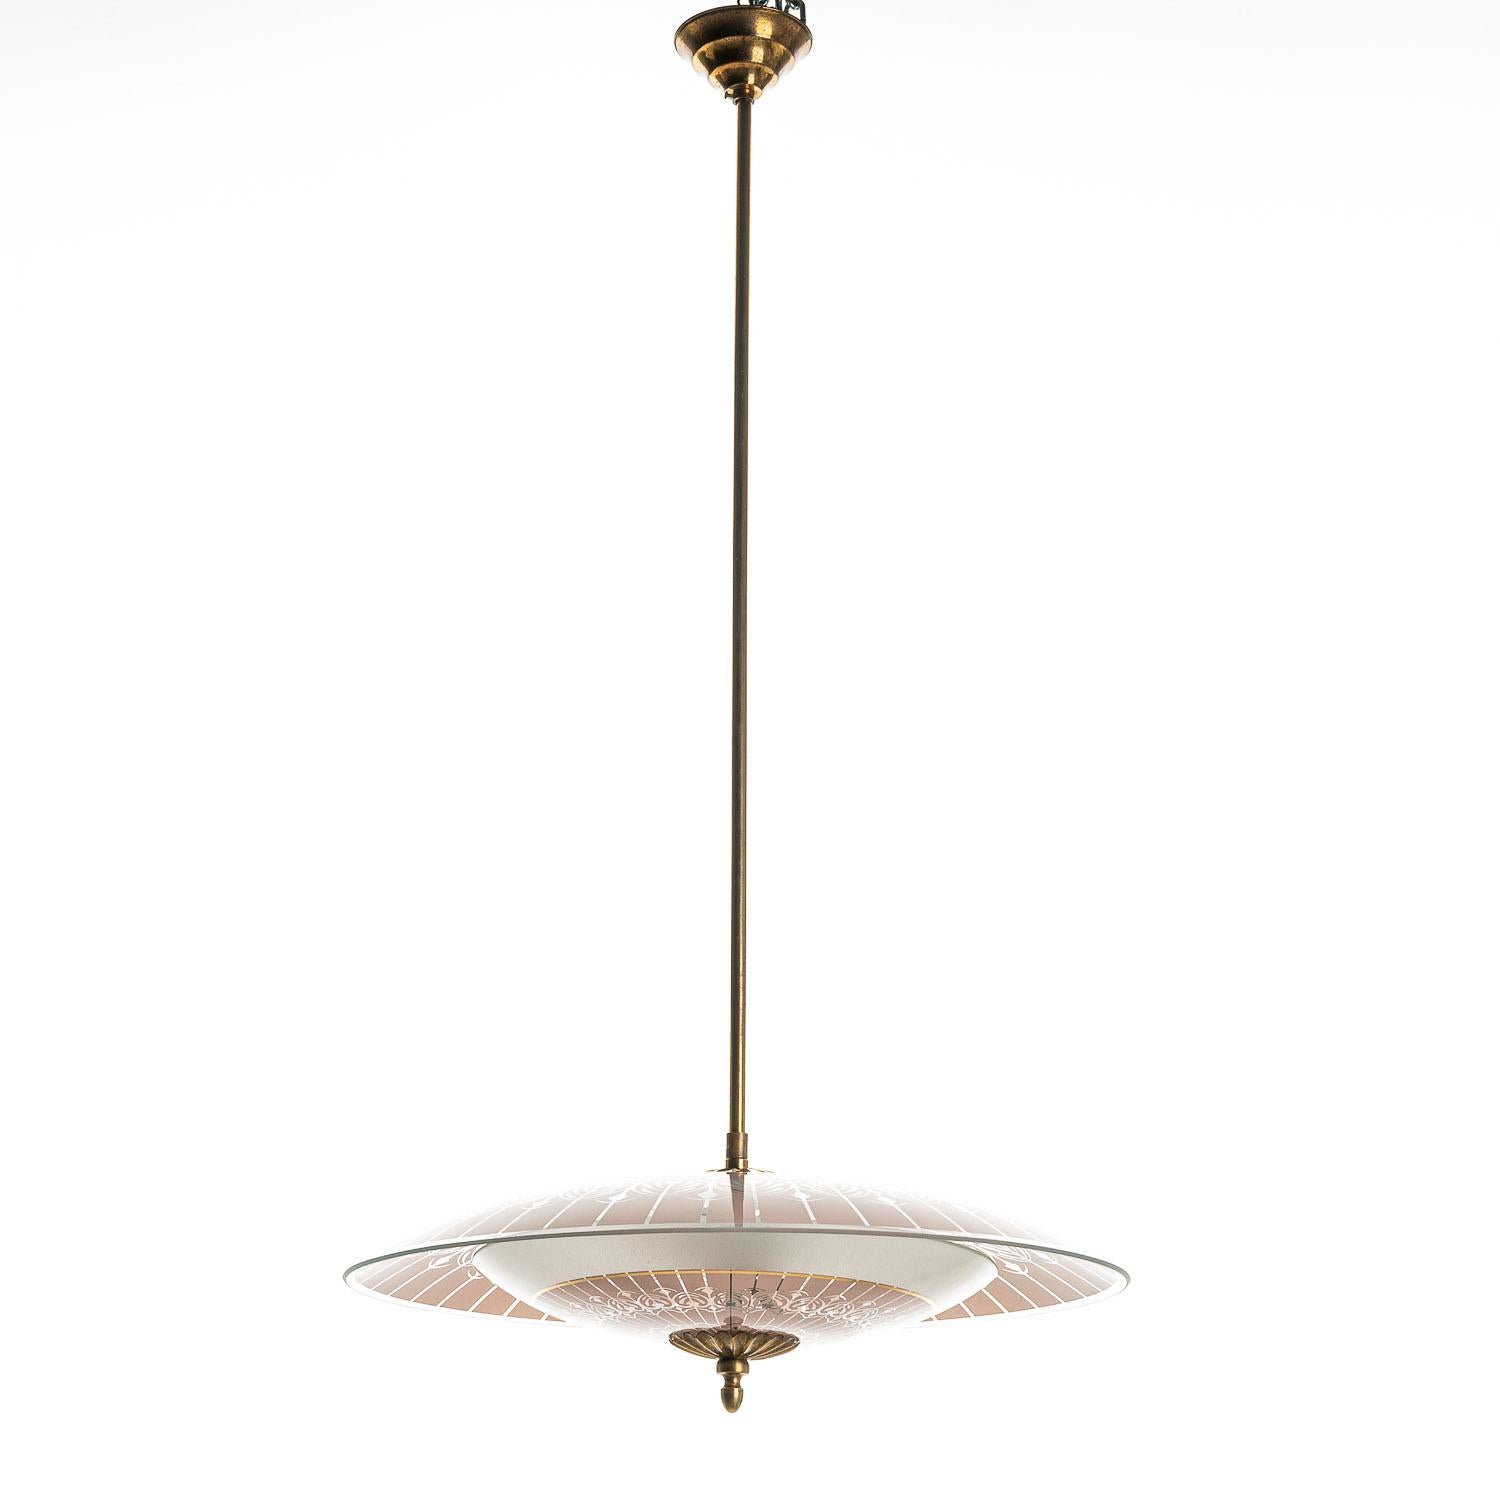 This wonderful piece consists of a brass frame connecting two unique frosted glass reflectors in pink. 
The lower glass reflector is accented with gold-colored rings and a stunning pattern. This mounts underneath a round, pink frosted glass